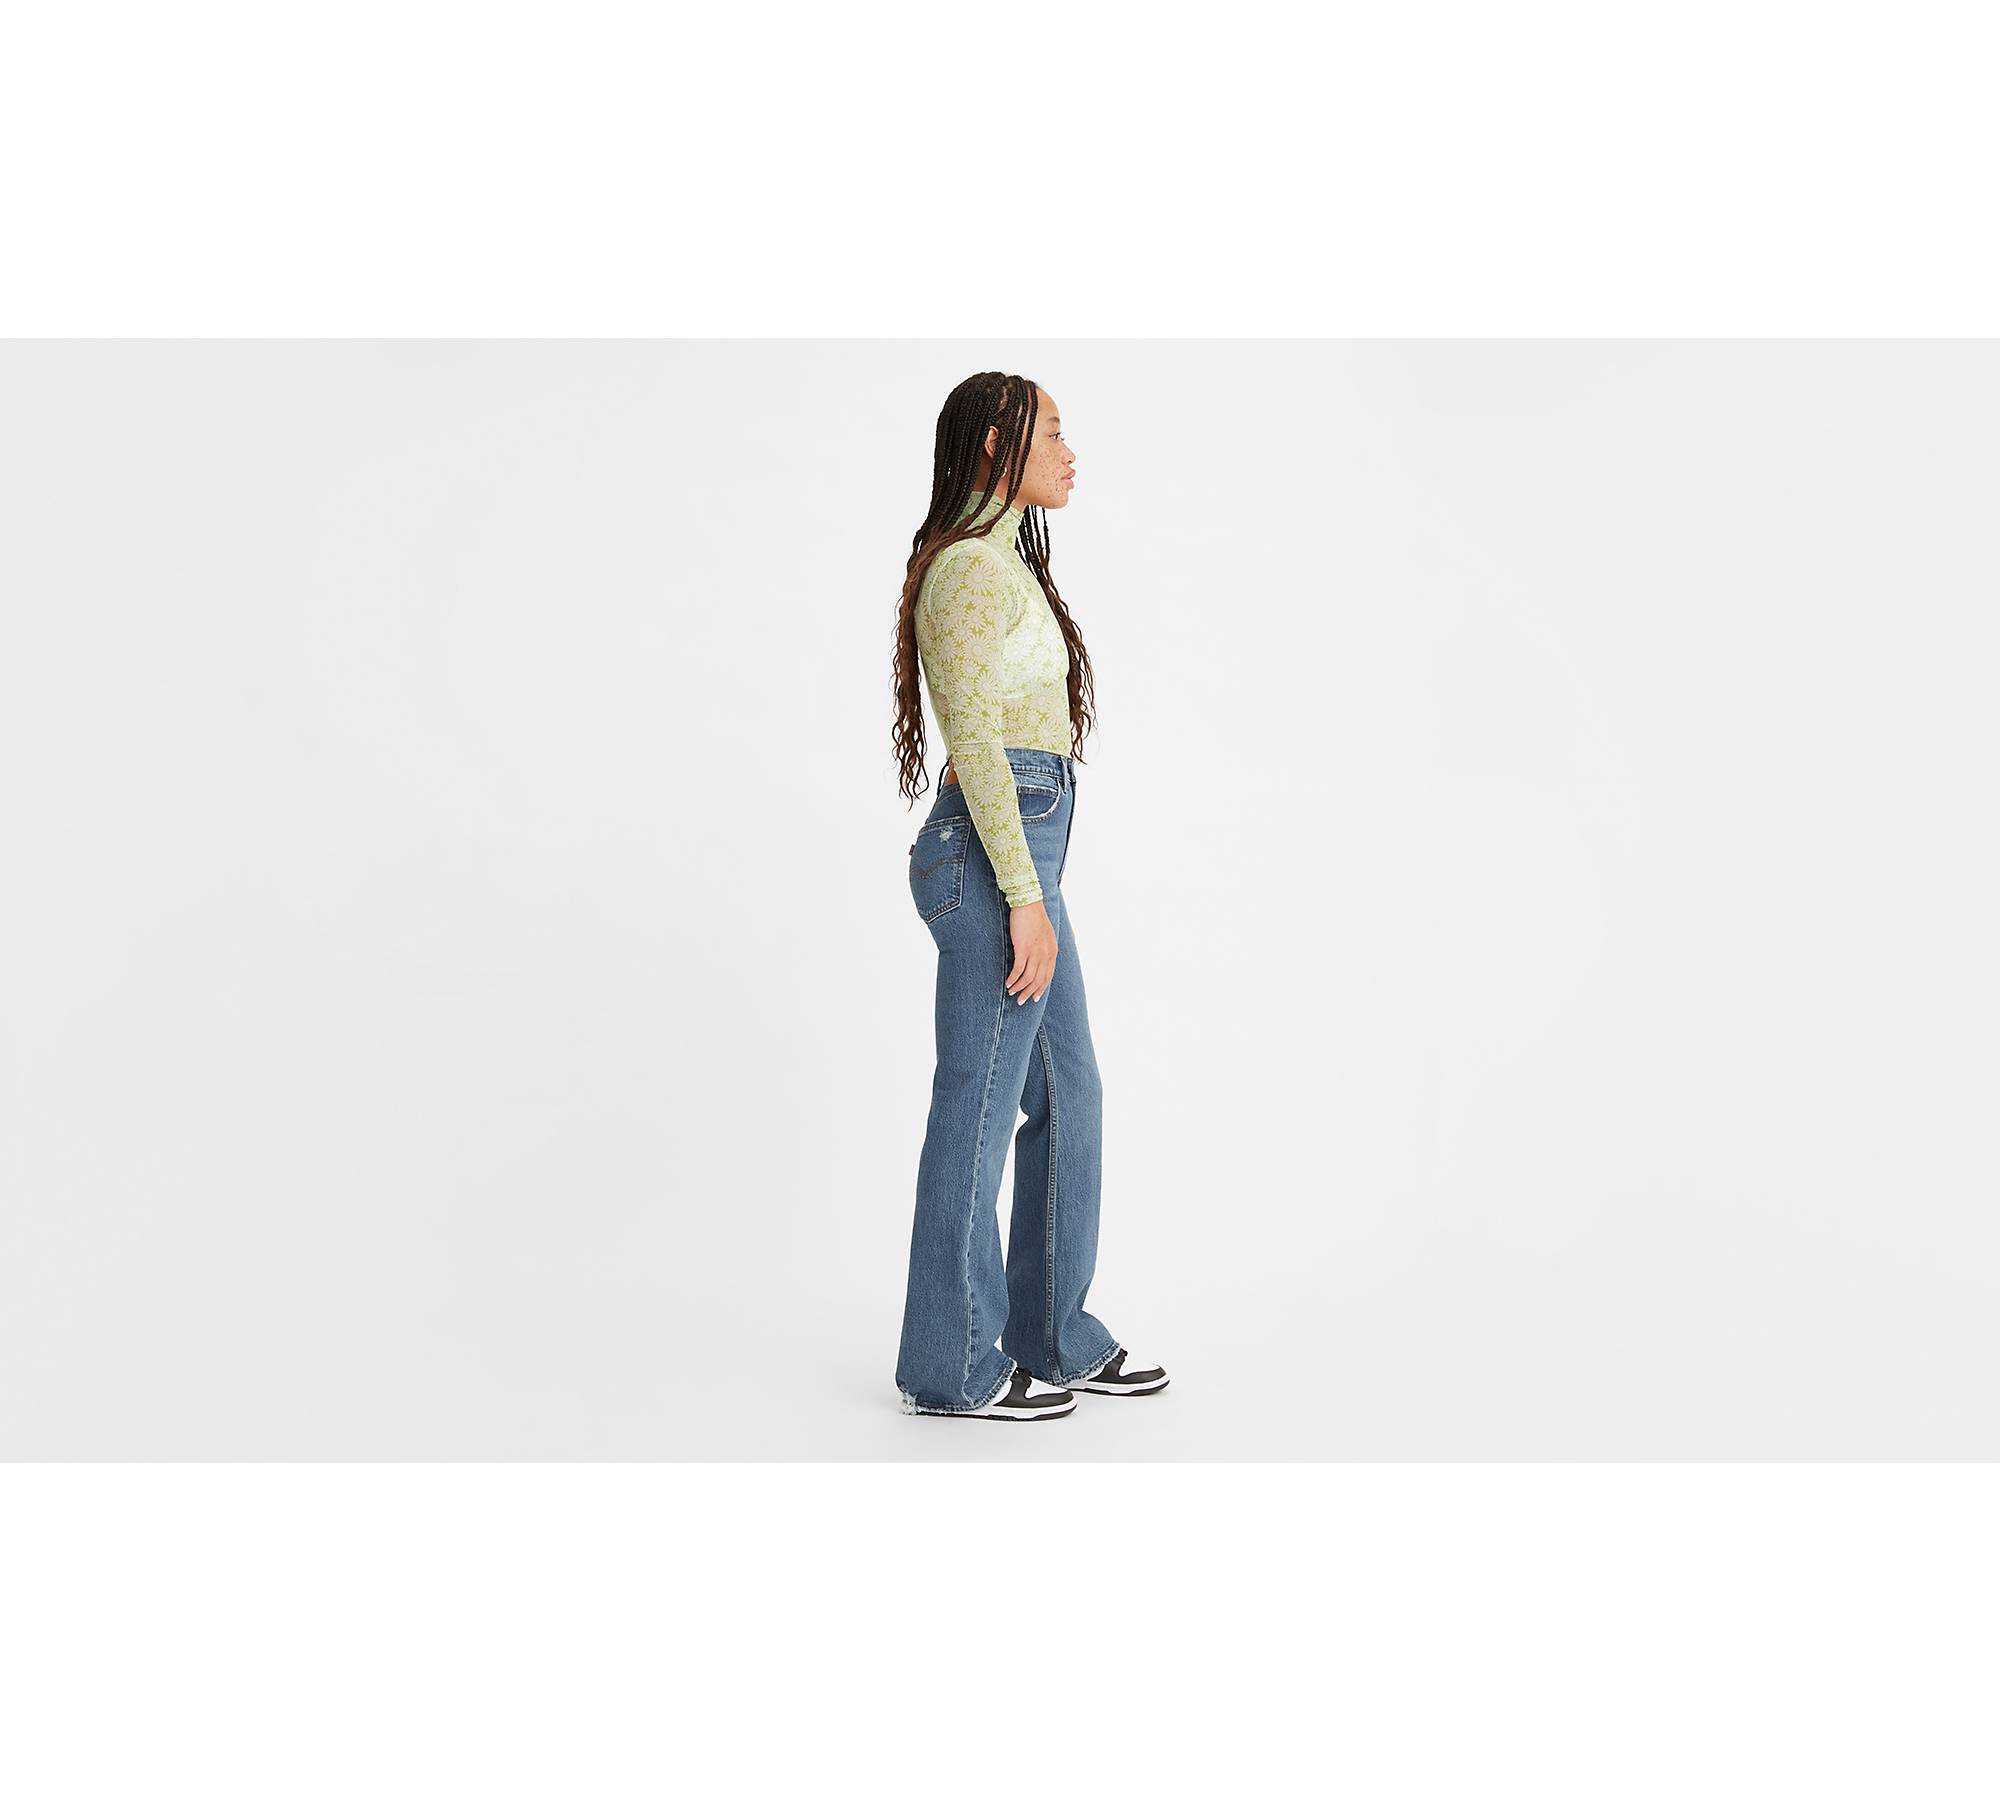 Women's Curve Love High Rise Vintage Flare Jean, Women's Clearance